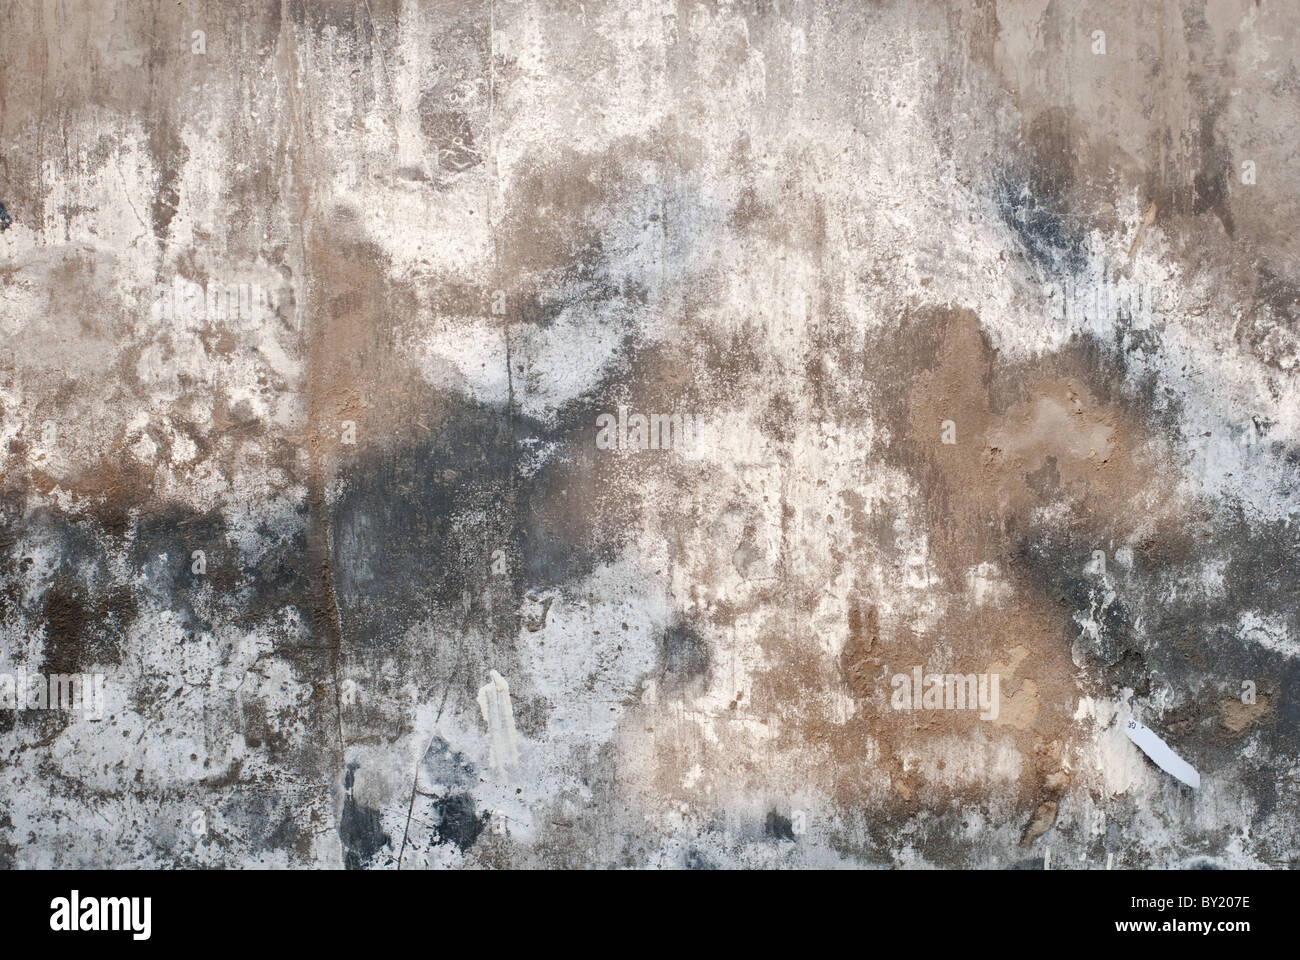 Detail Of A Concrete Wall With Cracks And White Mold Stock Photo